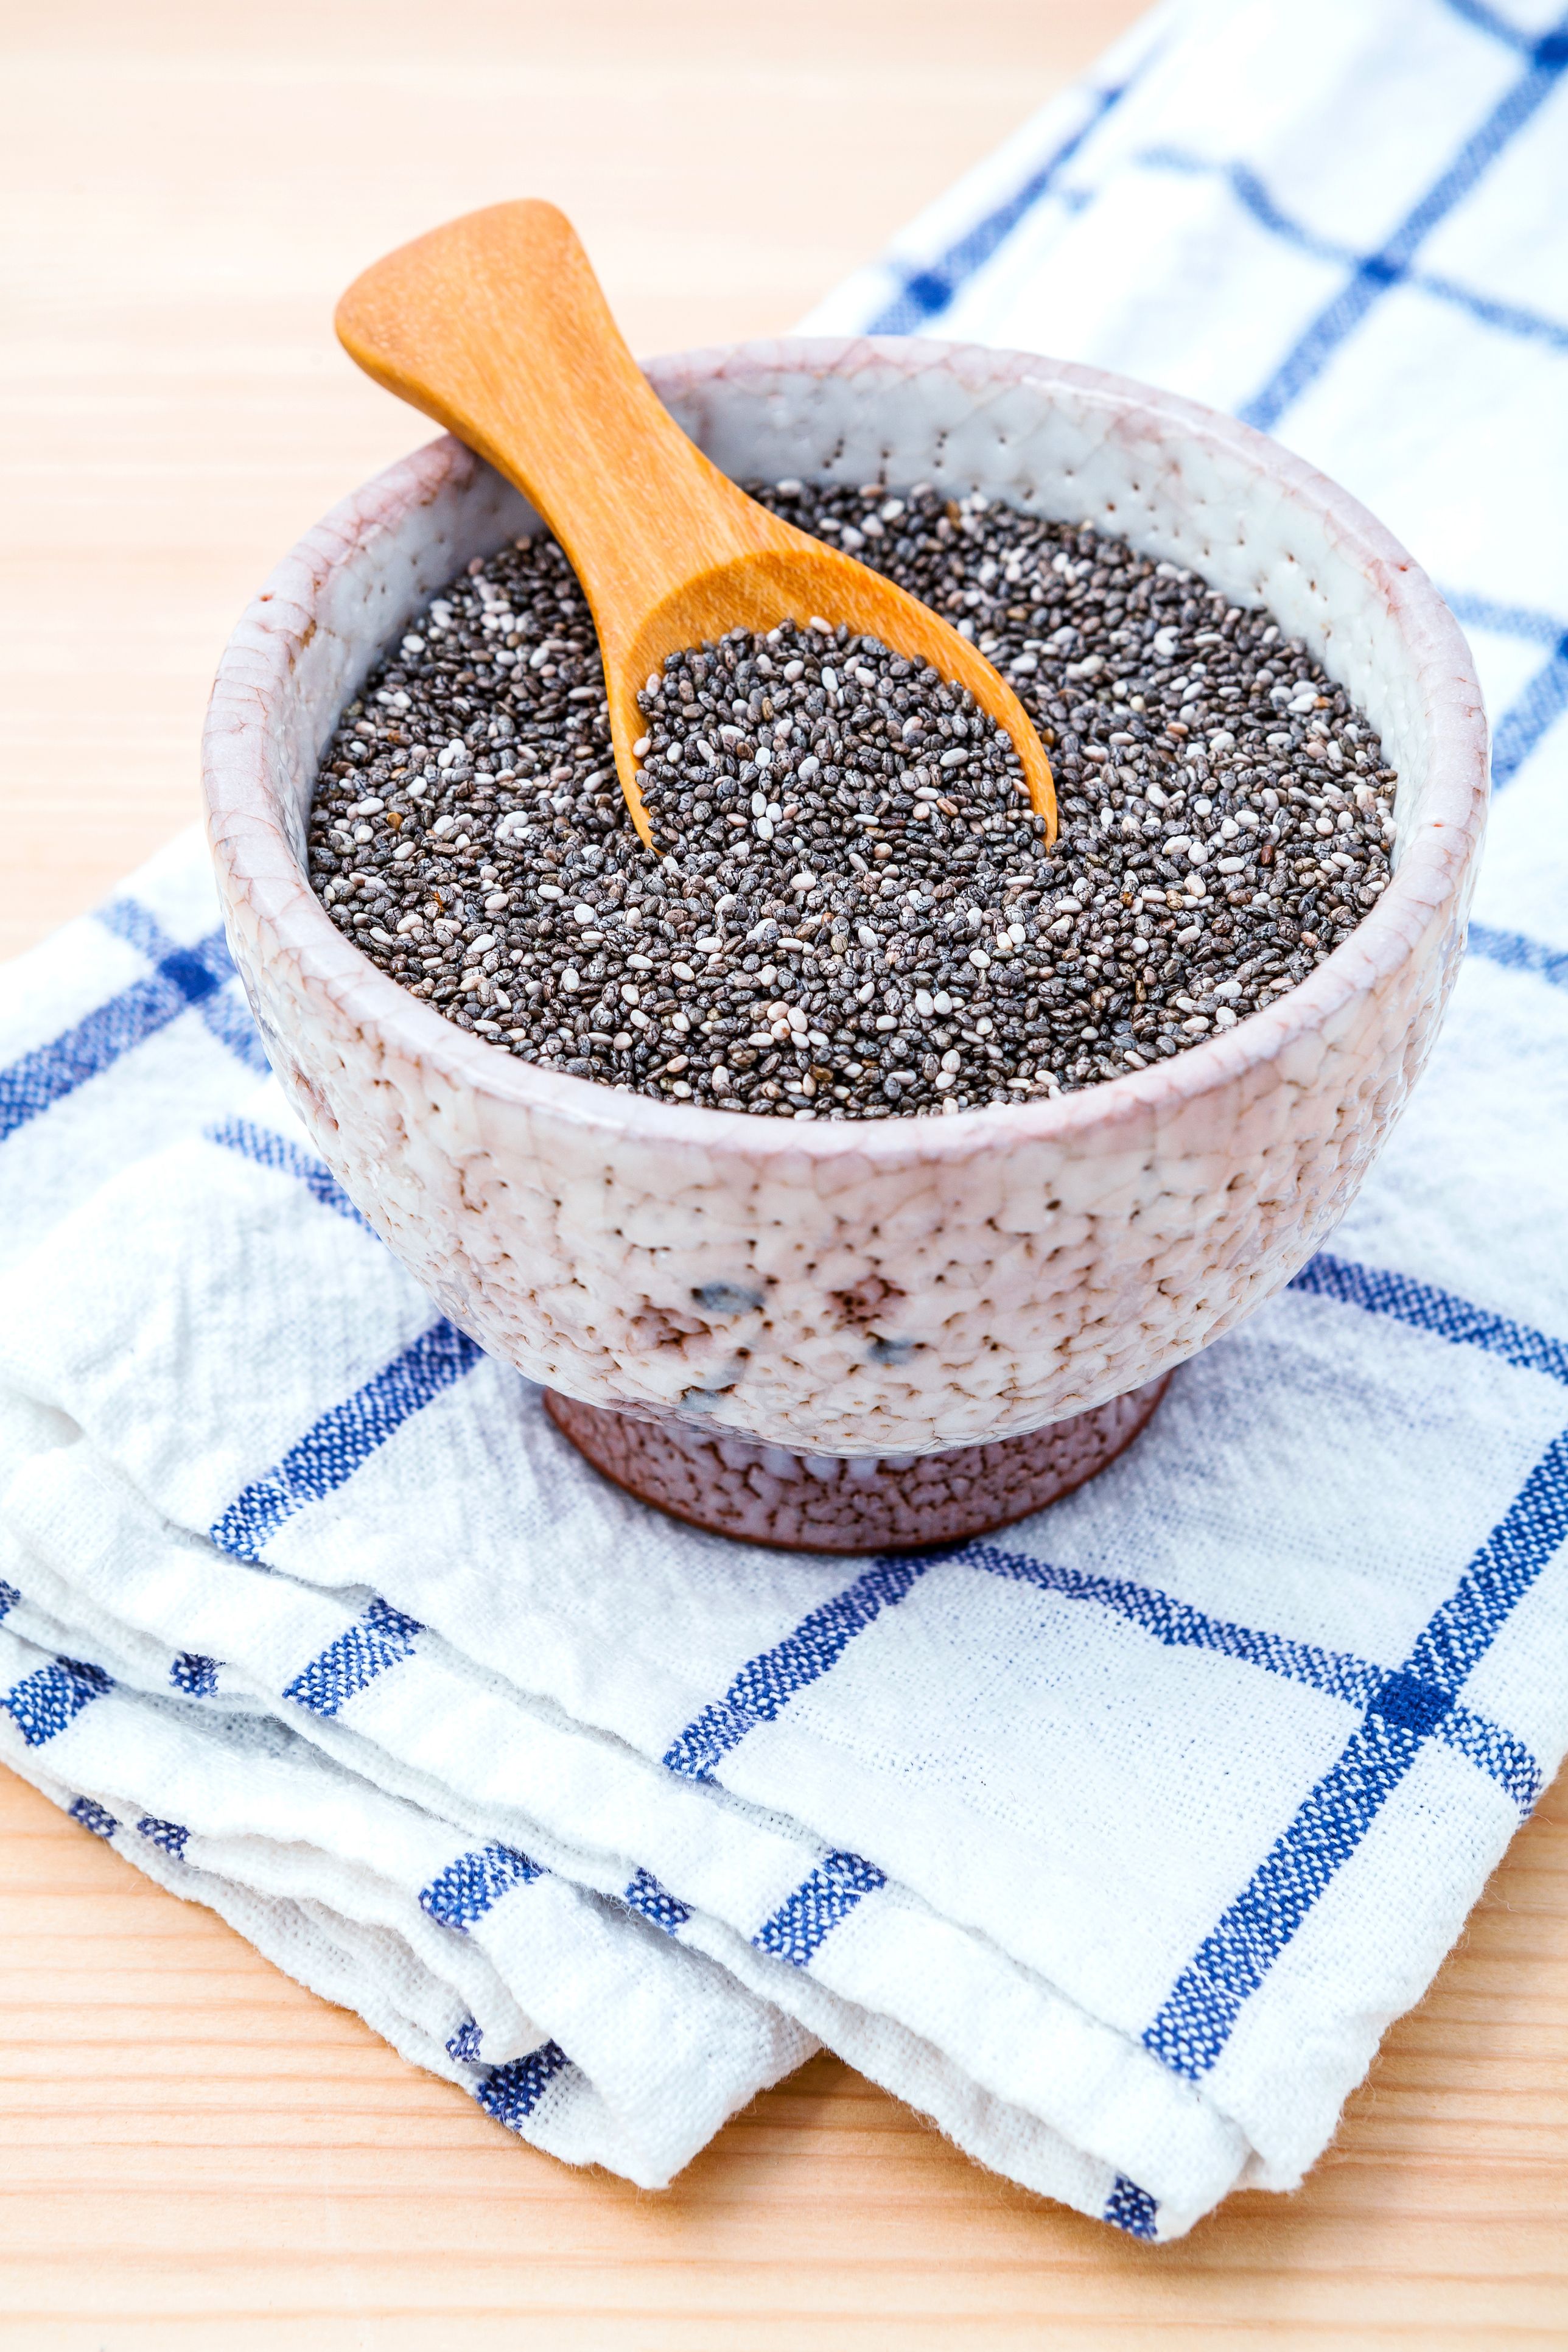 High Angle View Of Chia Seeds In Bowl On Table